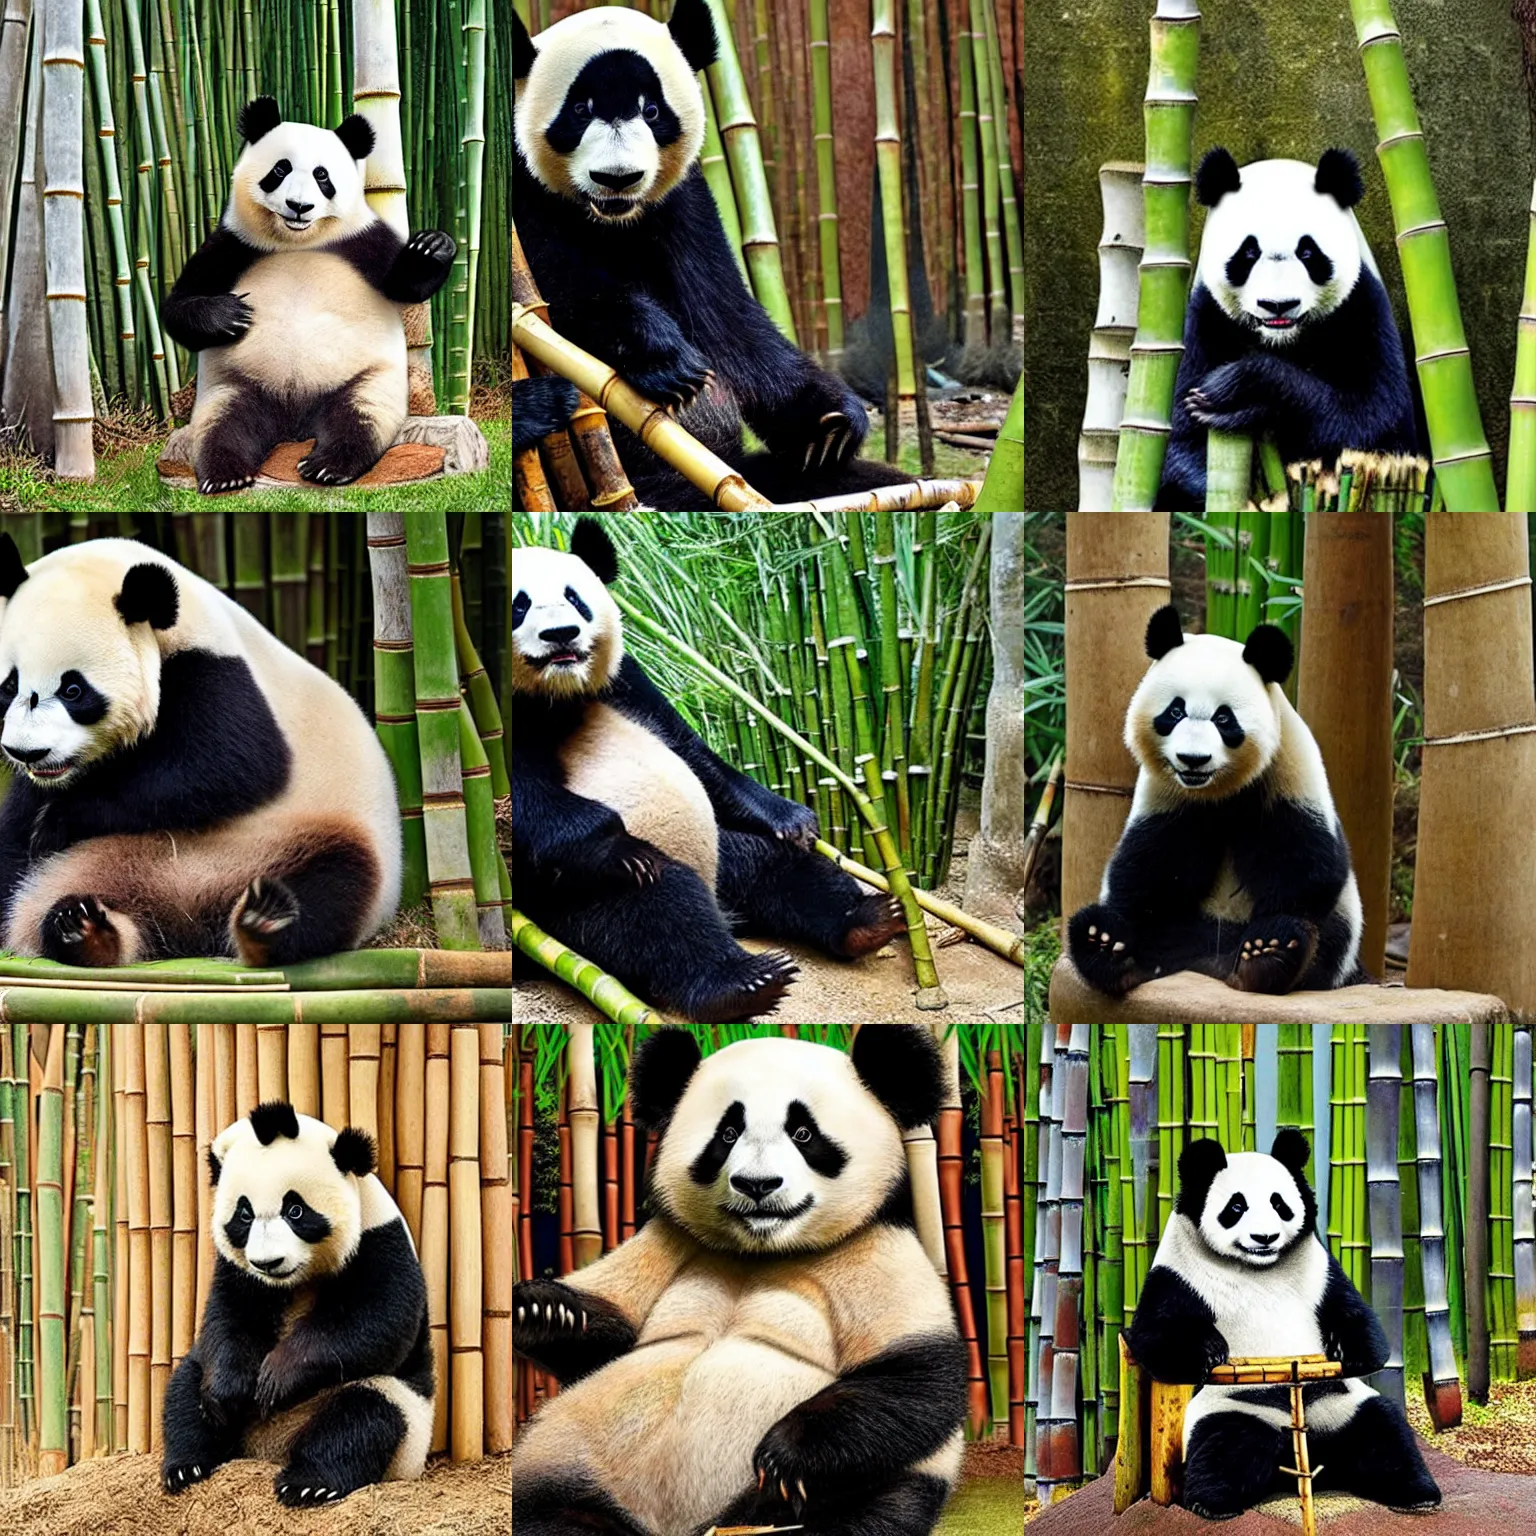 Prompt: a panda sitting on a game of thrones throne made of bamboo